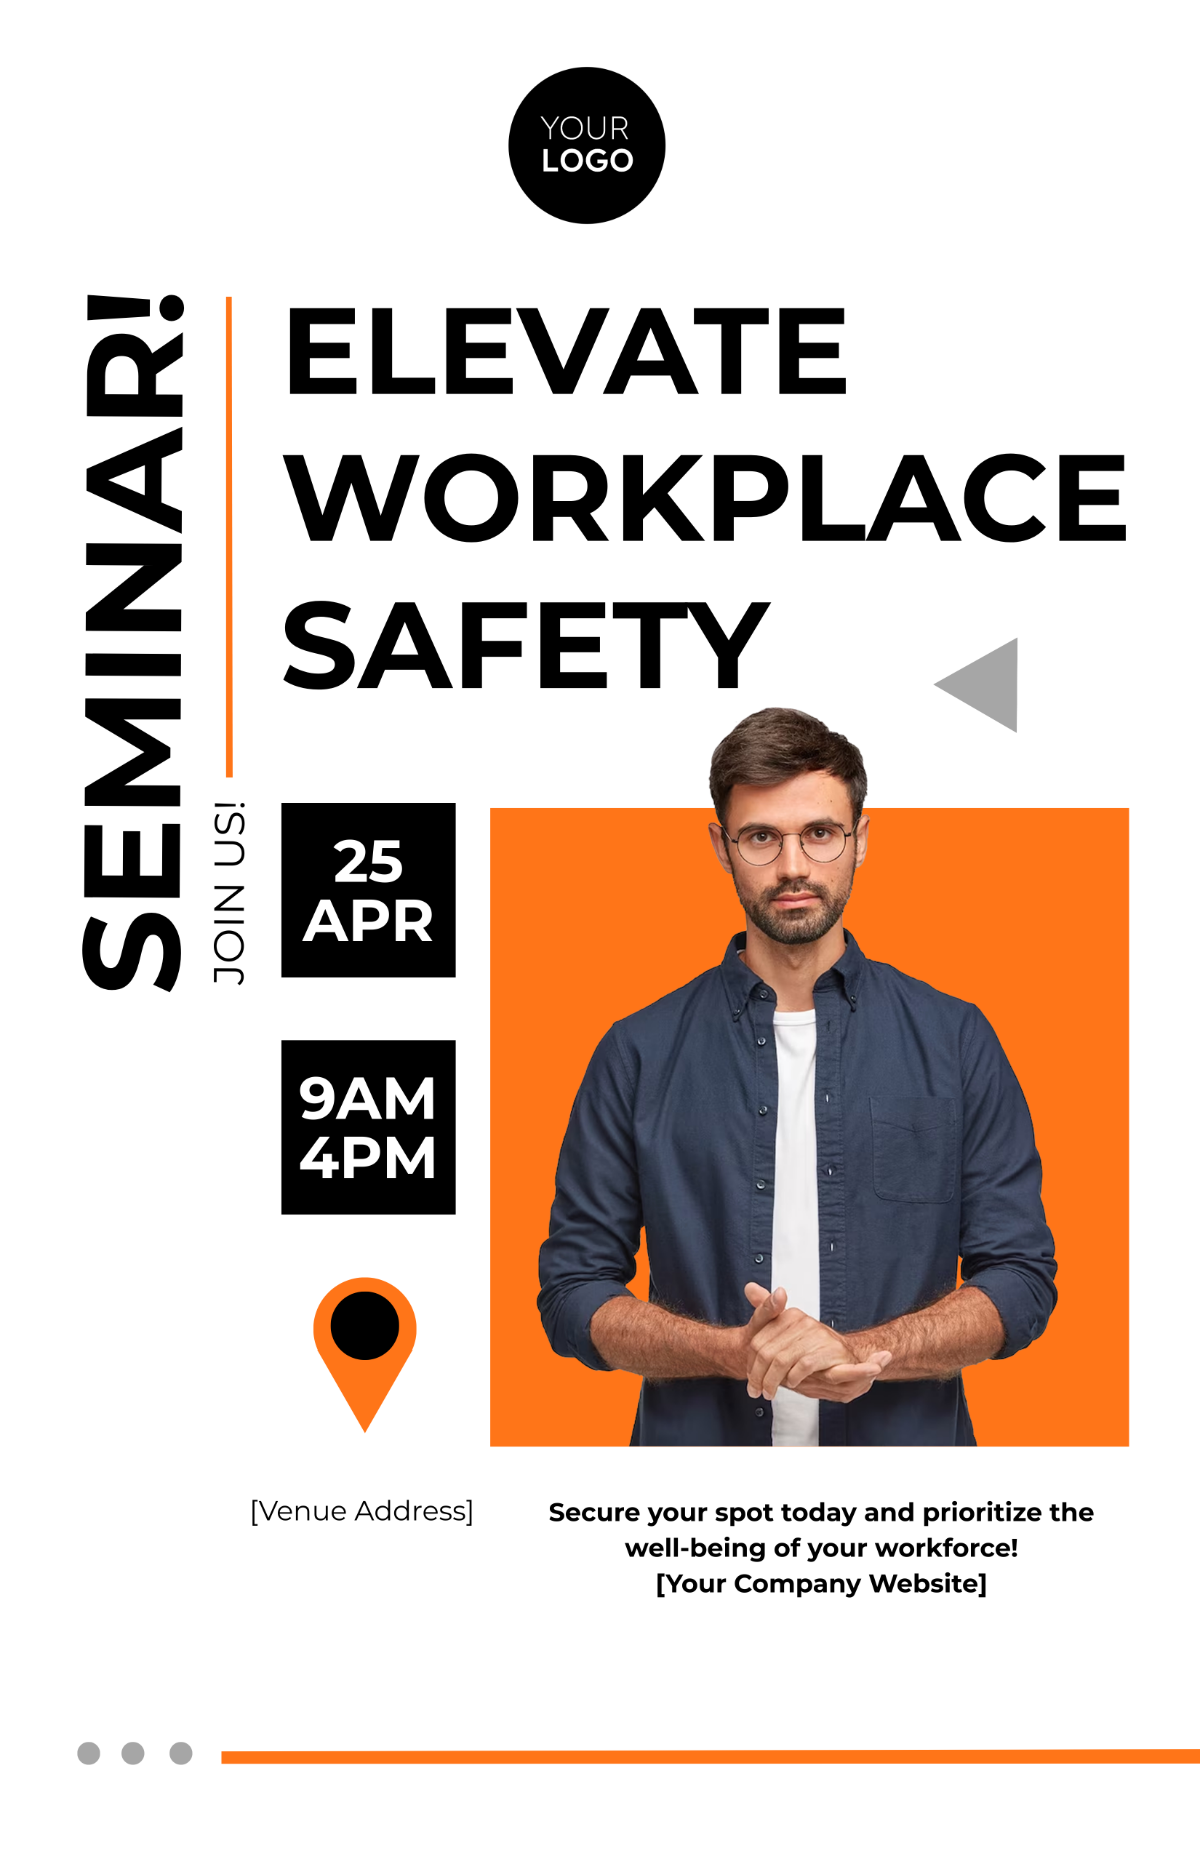 Free Workplace Safety and Health Seminar Poster Template